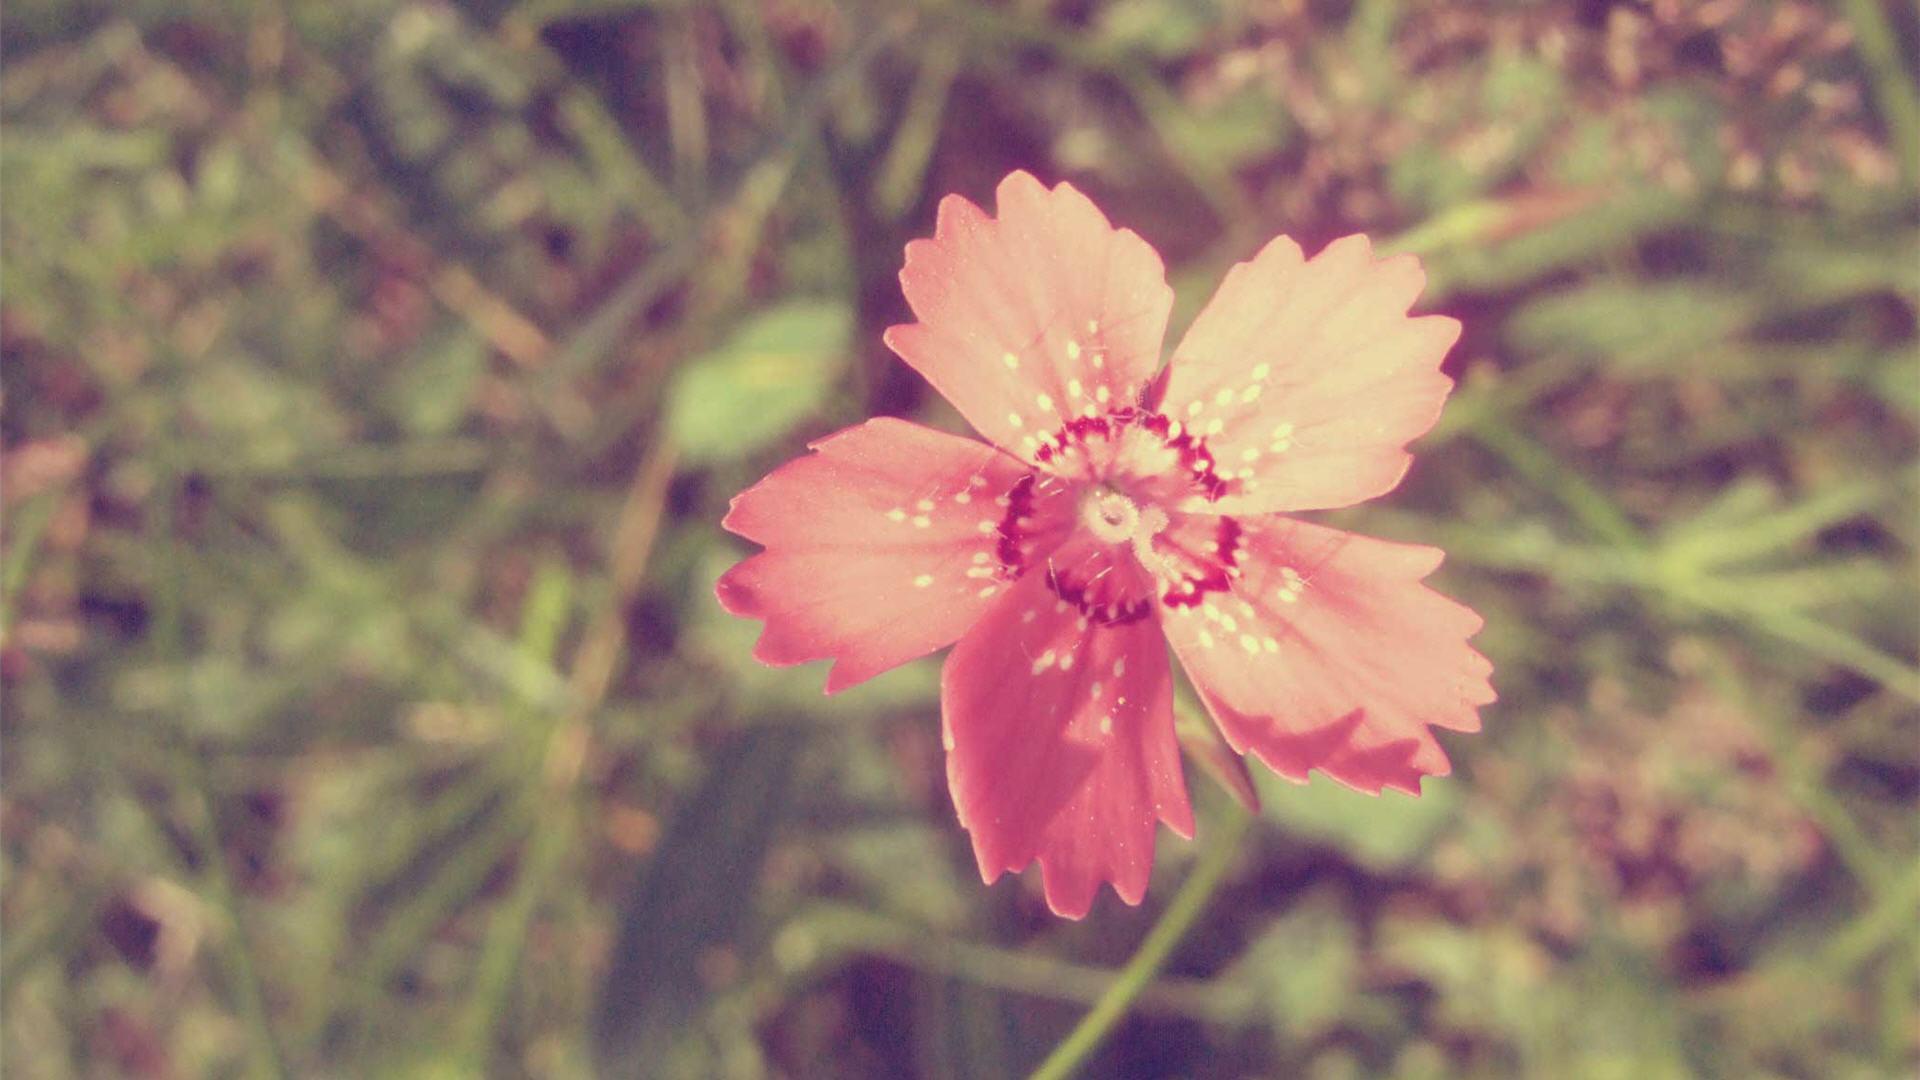 Vintage Flowers Wallpapers 10468 1920x1200 px